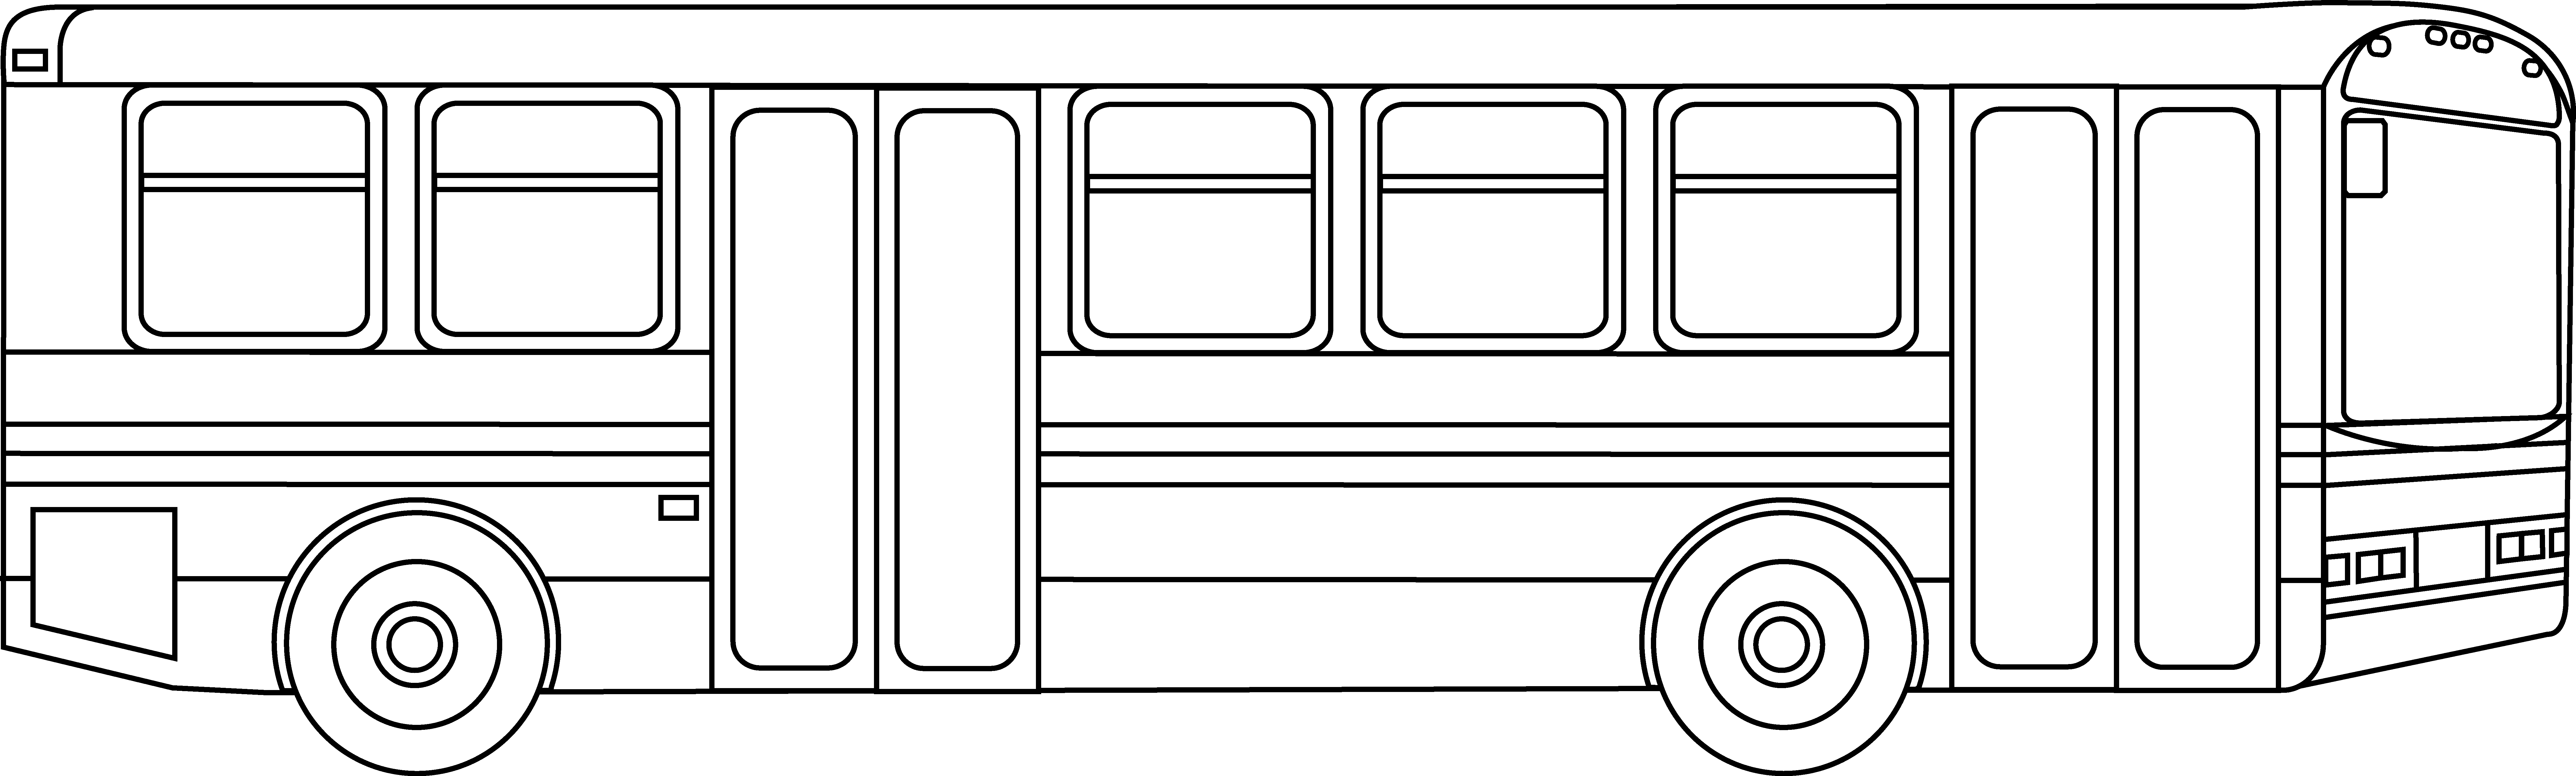 Free Bus Outline Picture, Download Free Bus Outline Picture png images